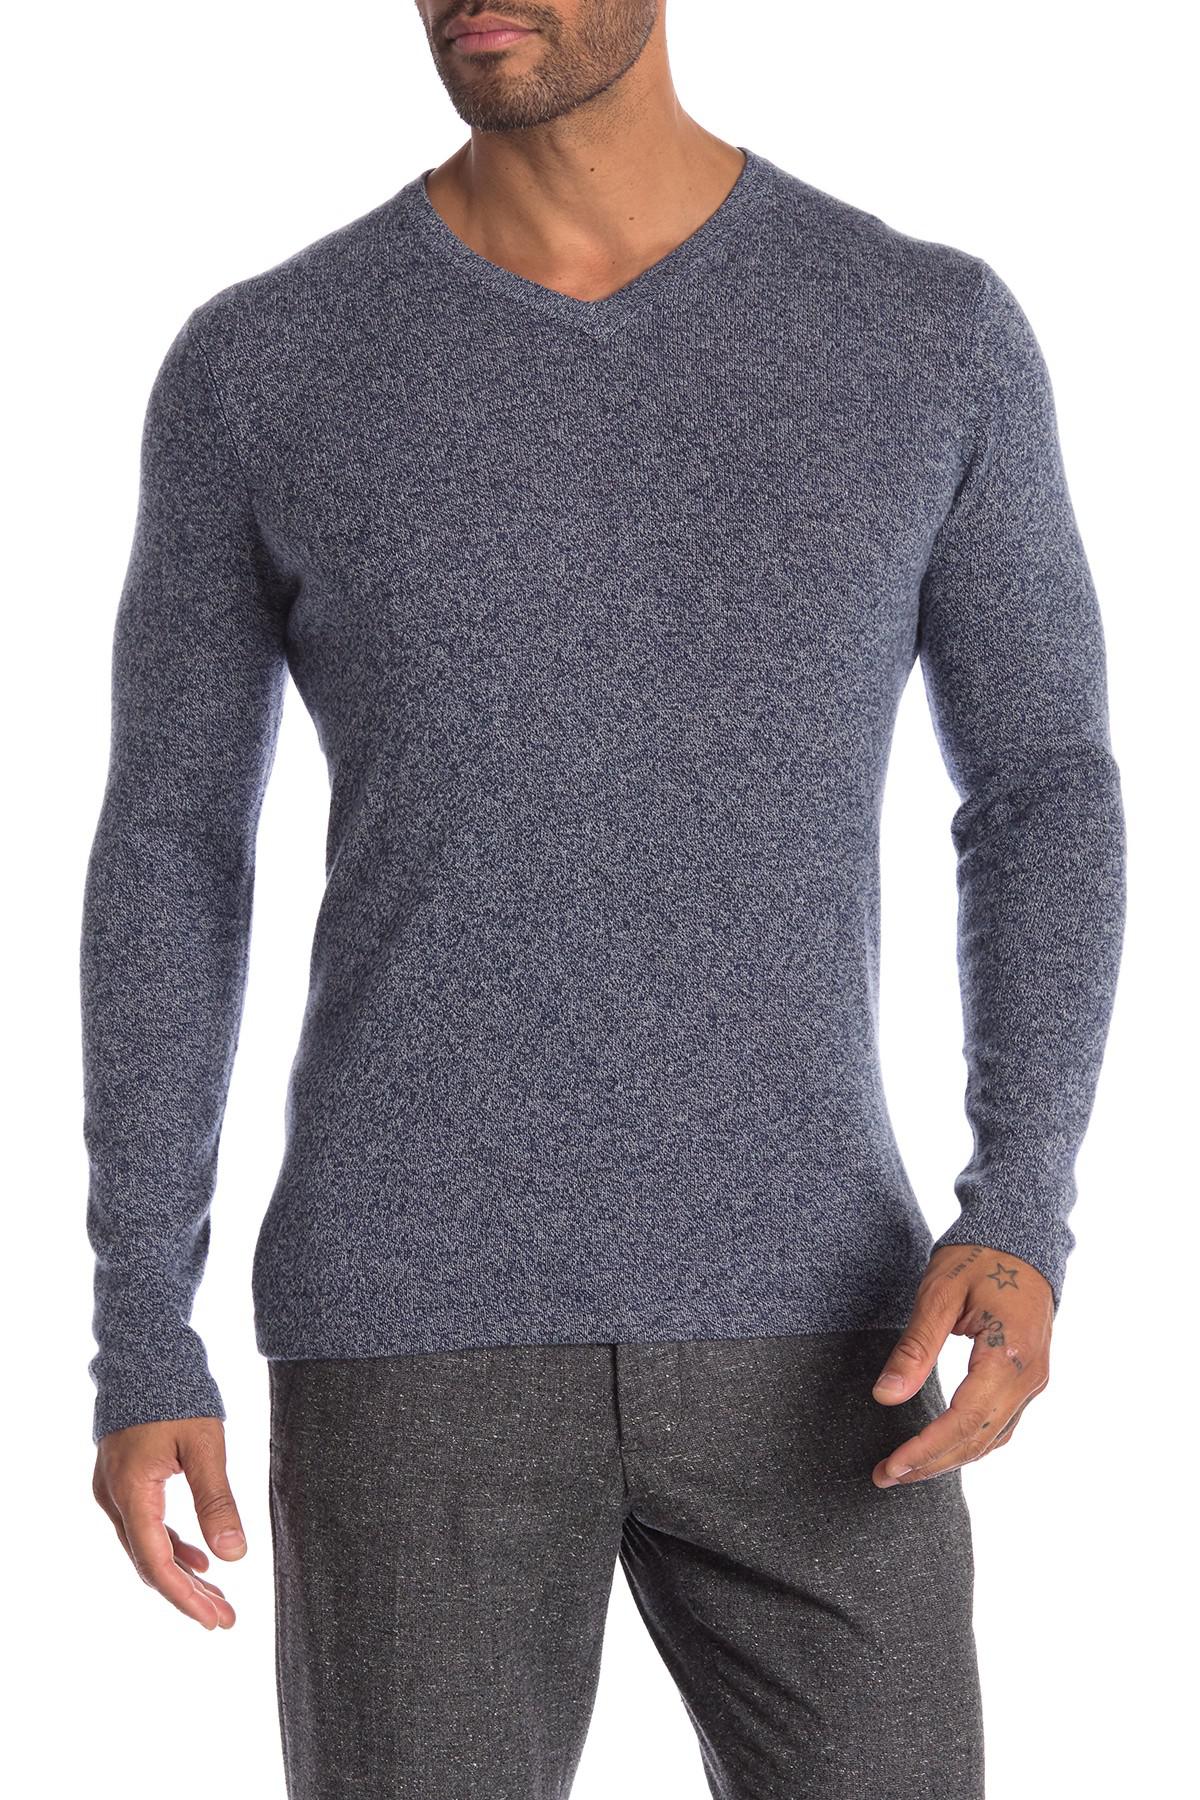 Autumn Cashmere V-neck Basic Cashmere Sweater in Gray for Men - Lyst